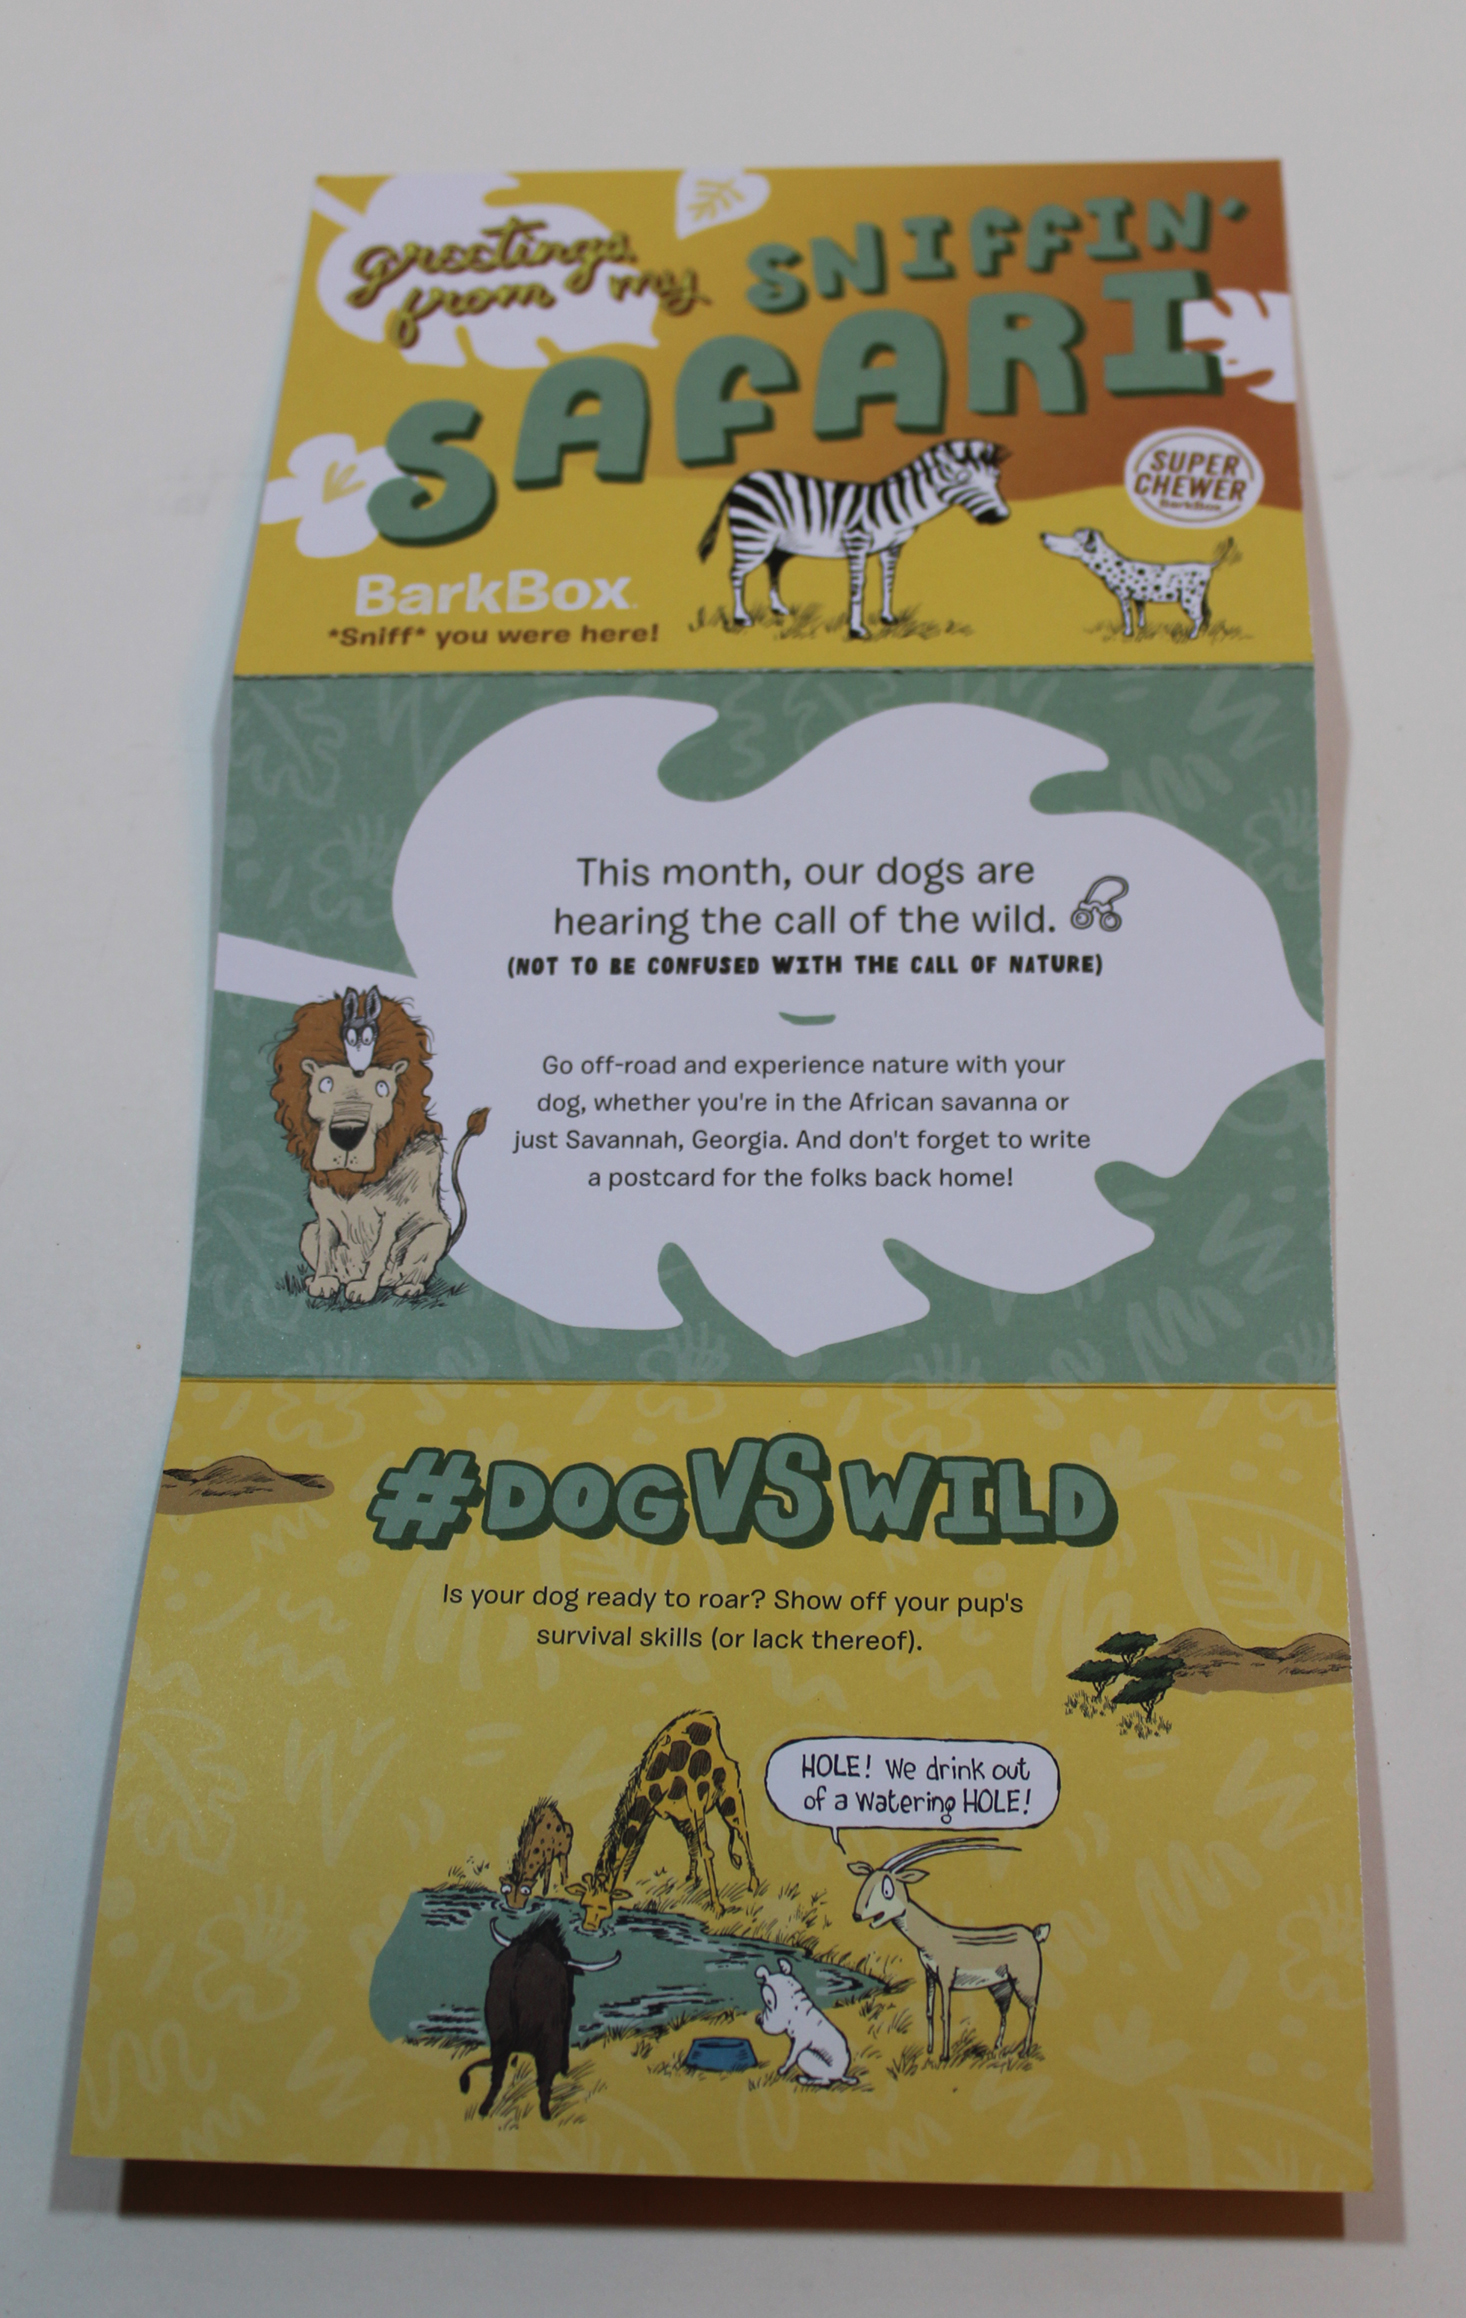 barkbox-super-chewer-february-2017-booklet-outside